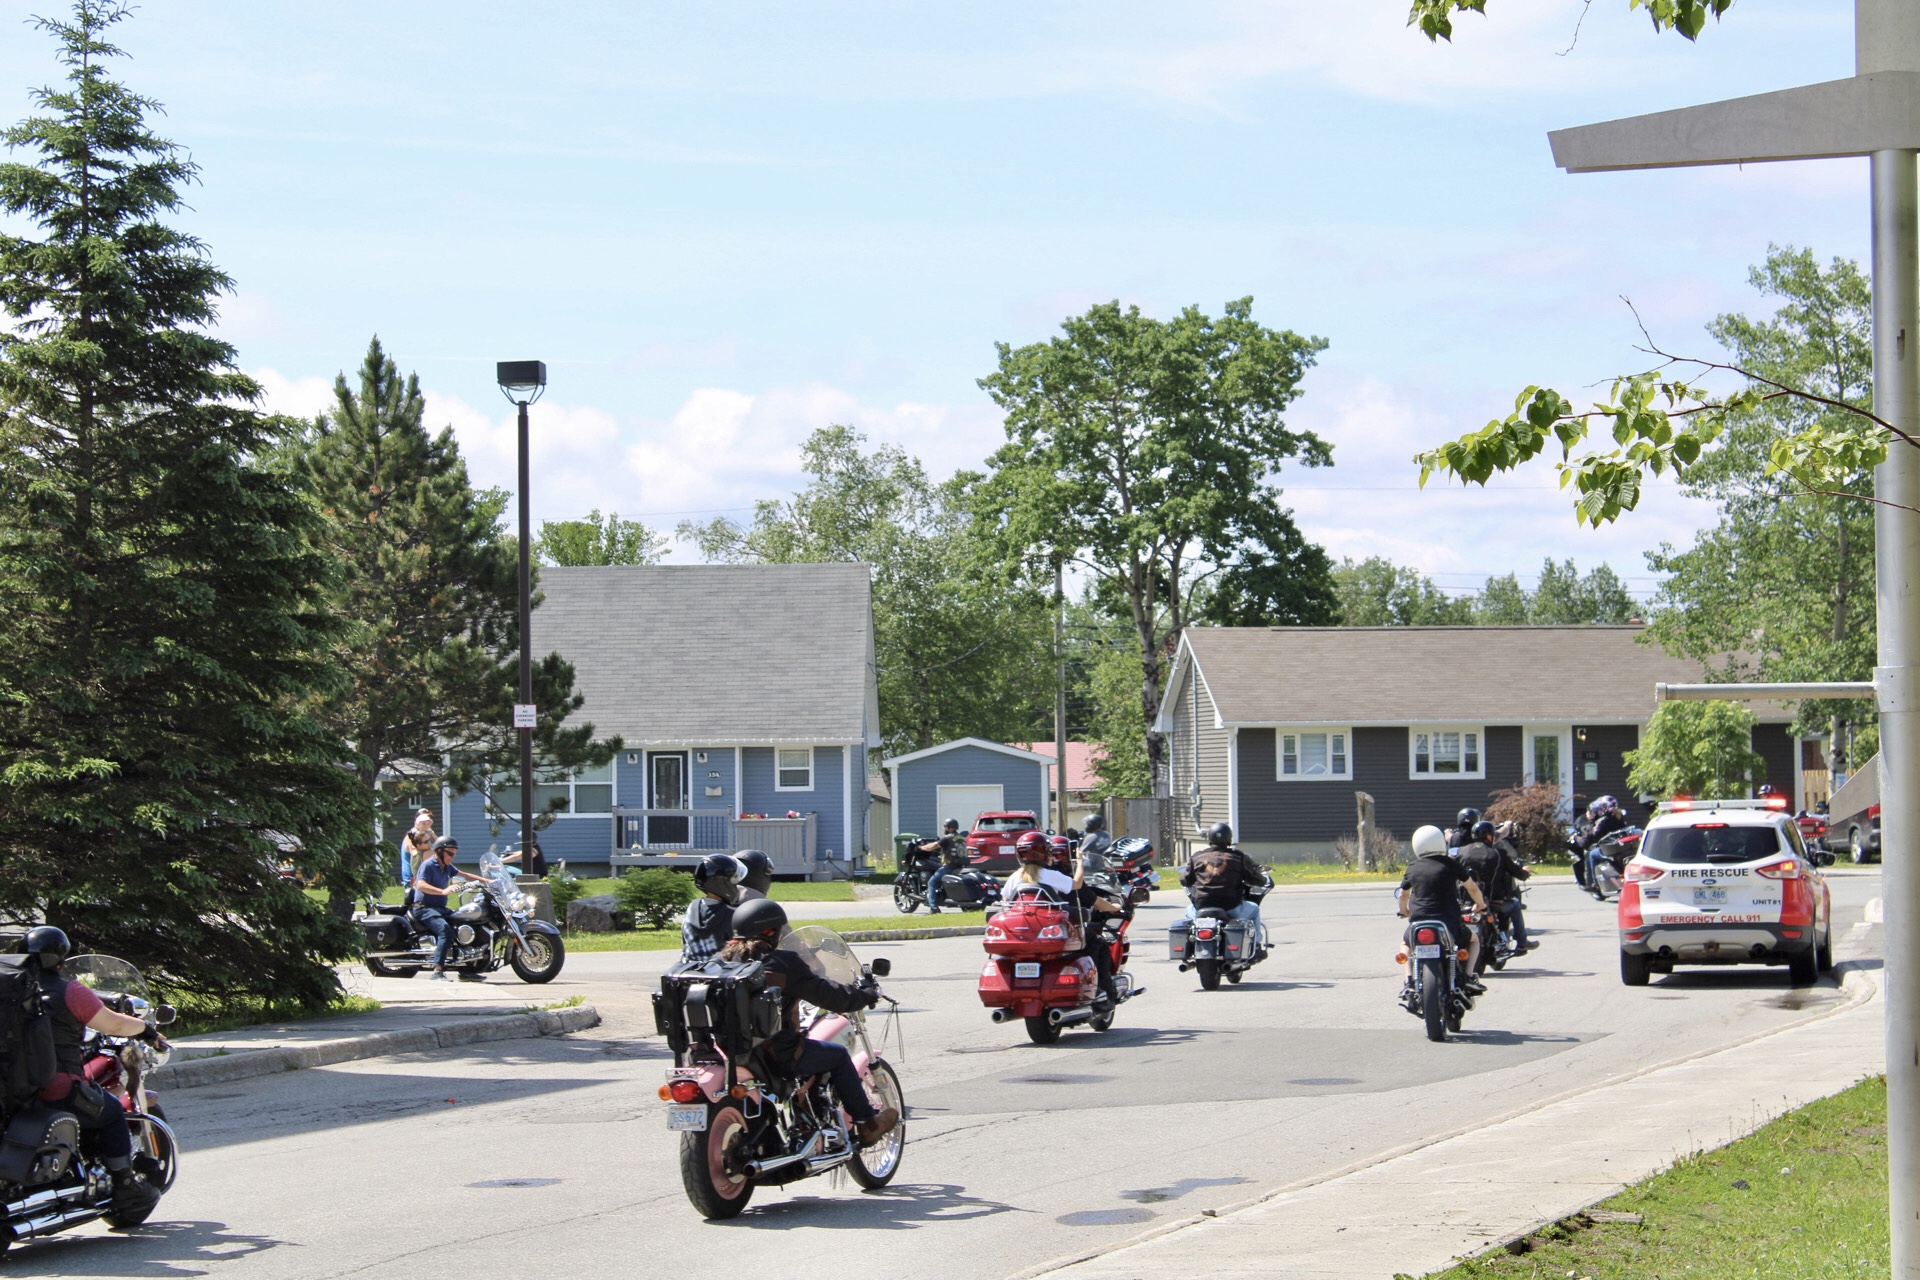 Image is of motorcyclists riding during the Ride for Sight event